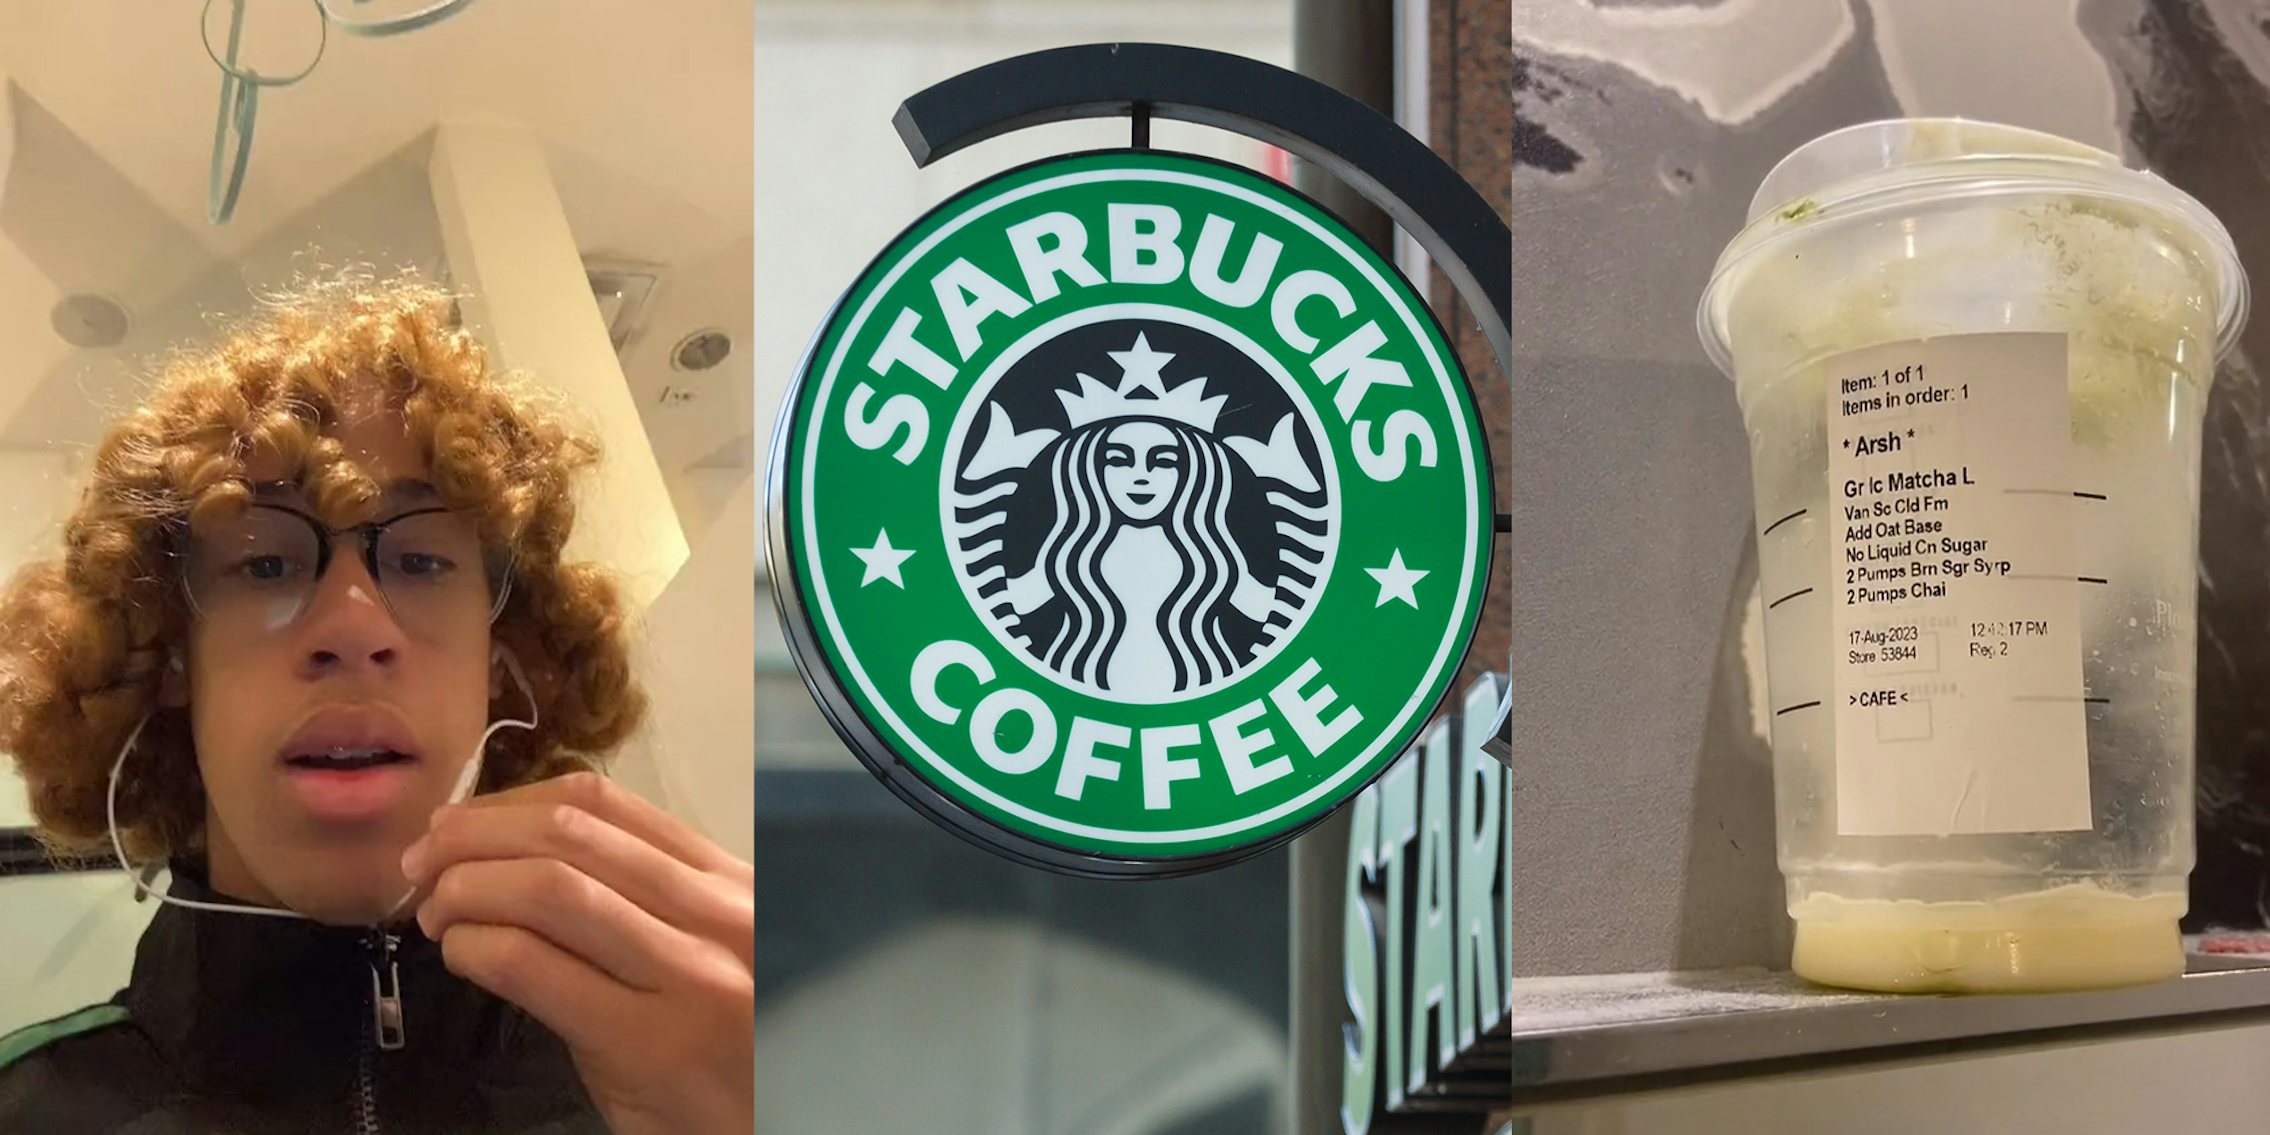 Clothing store worker calls out customer for leaving behind empty Starbucks cup in dressing room